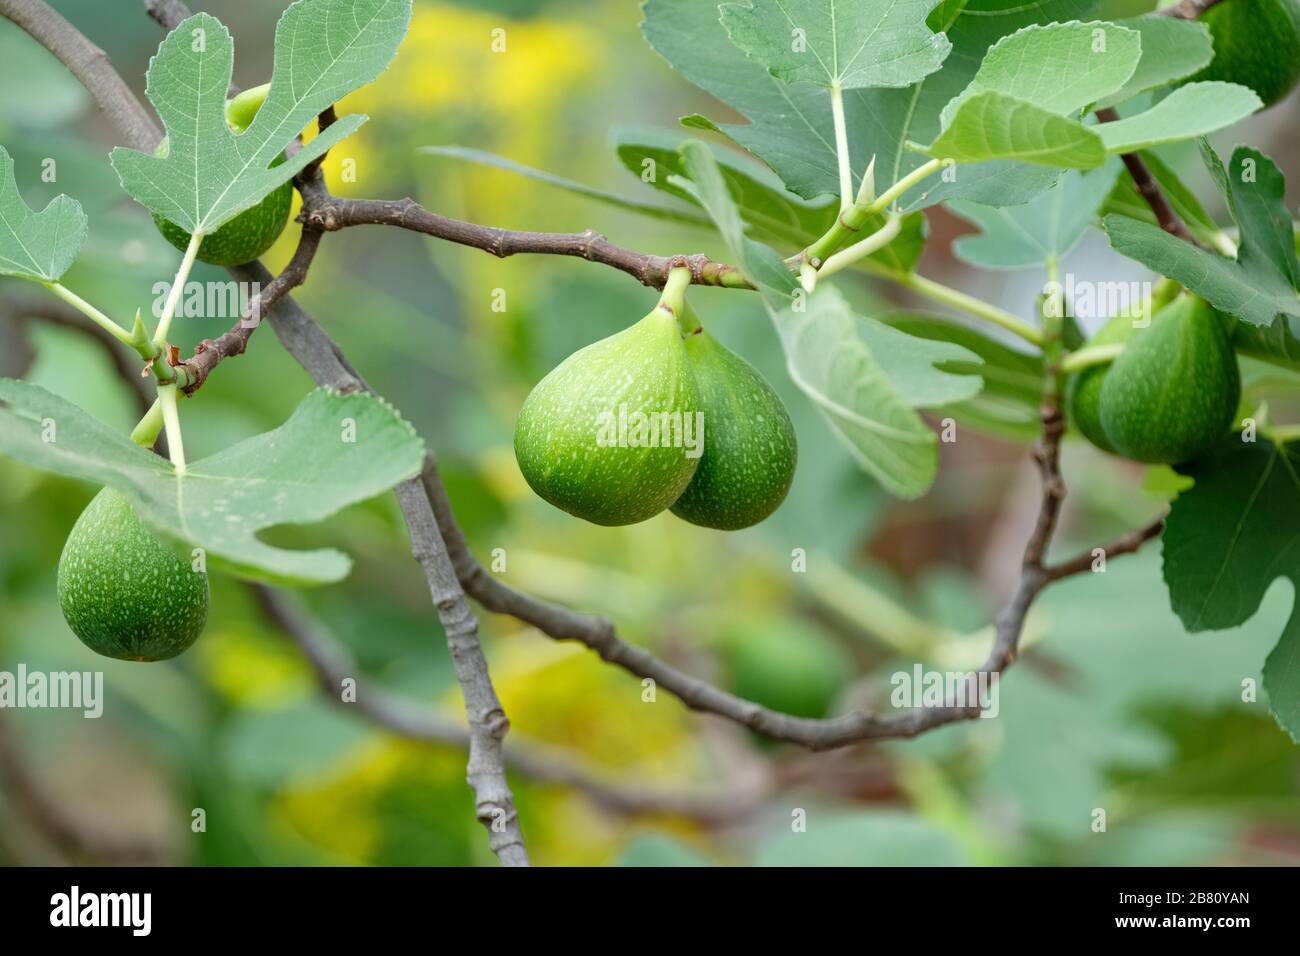 Ficus carica 'Excel', Fig excel. Developing fruit on a tree Stock Photo